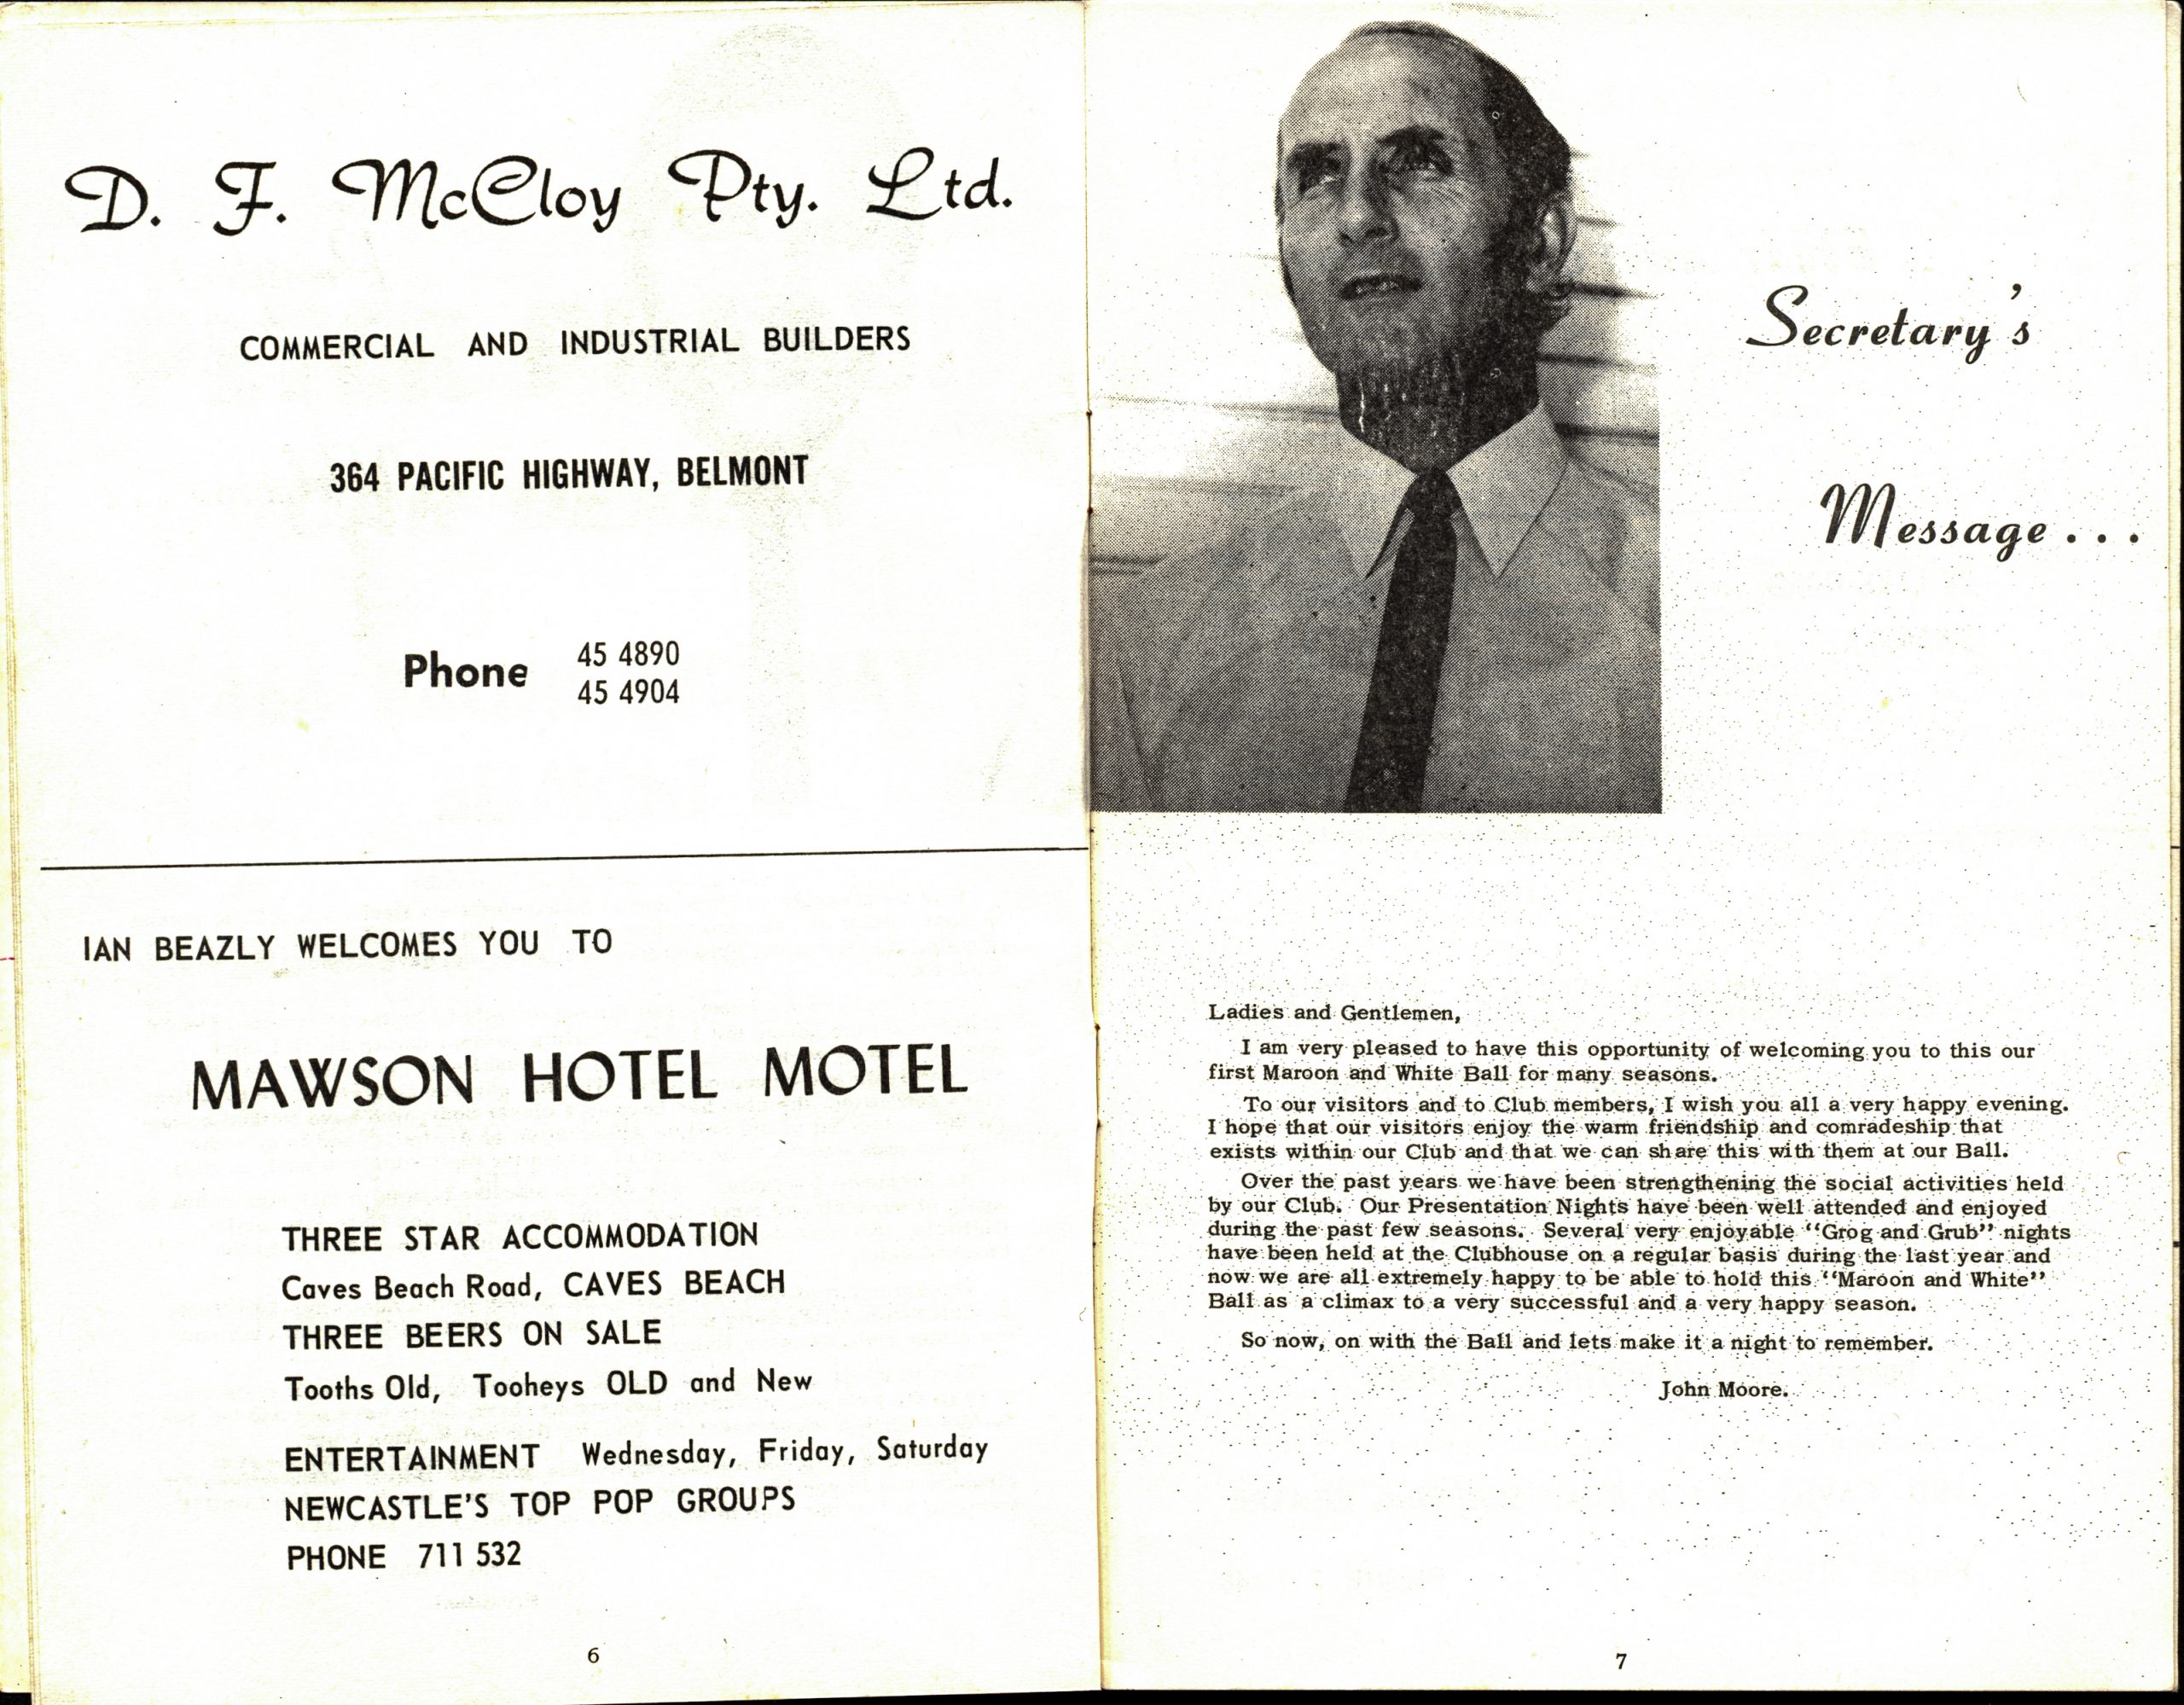 Programme pages with local advertisements followed by a black and white photograph of the club secretary, John Moore, in a shirt and tie alongside a message to those attending the Surf Club Ball,